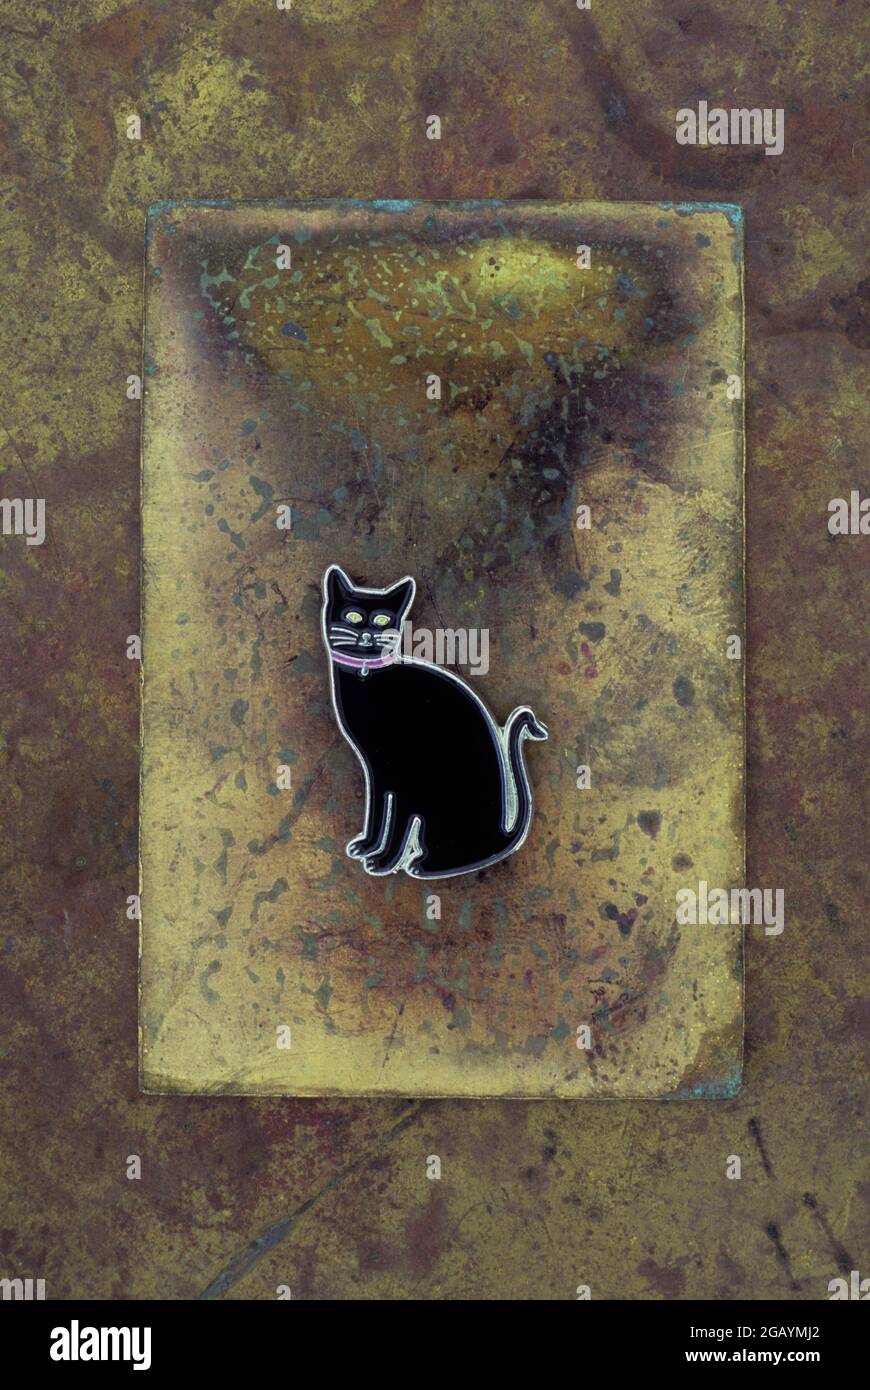 Enamel brooch or badge or pin of black cat lying on tarnished brass Stock Photo